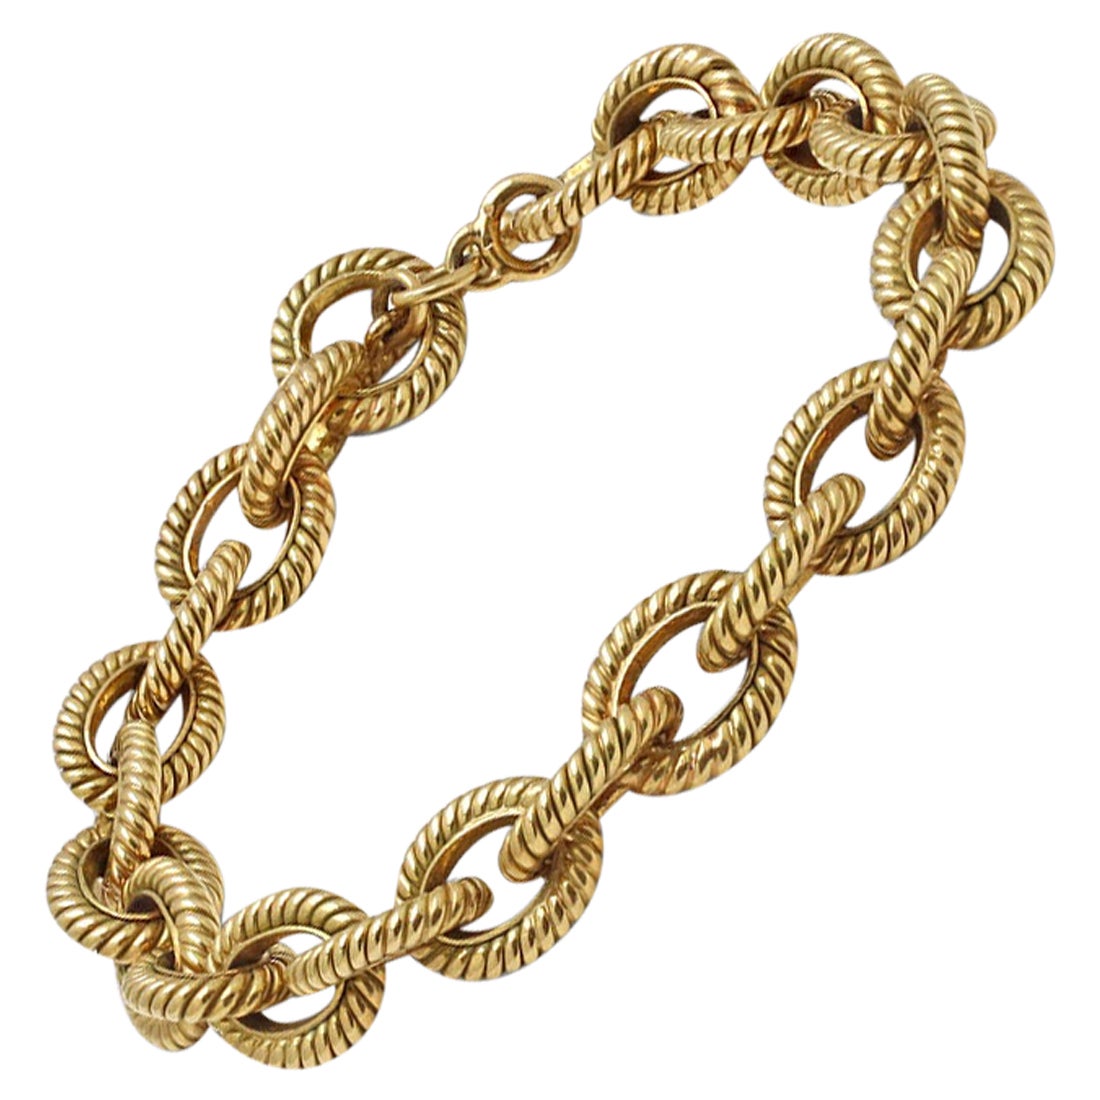 Tiffany & Co. Yellow Gold Twisted Oval Link Toggle Bracelet